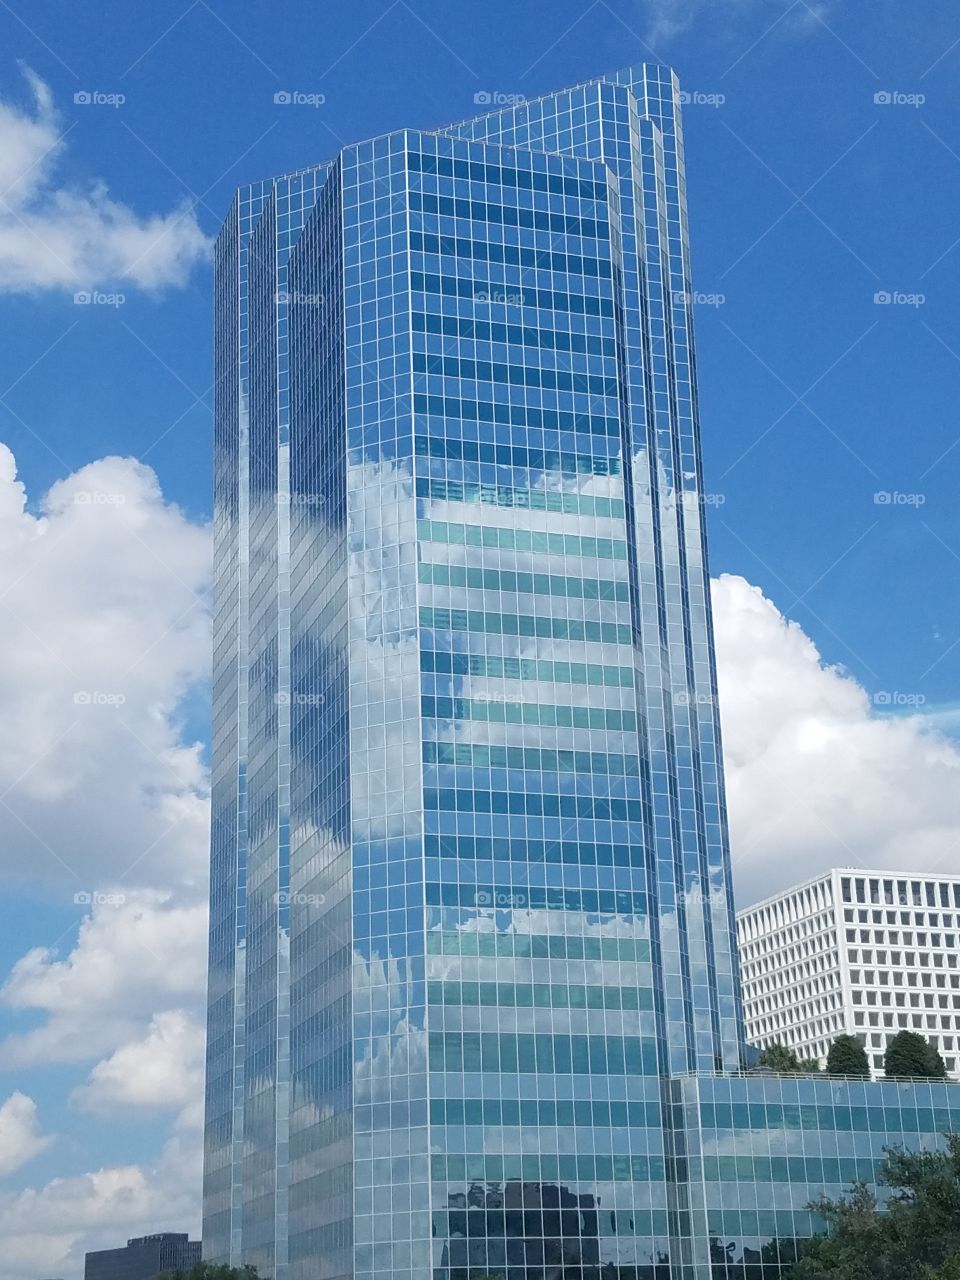 Building reflects